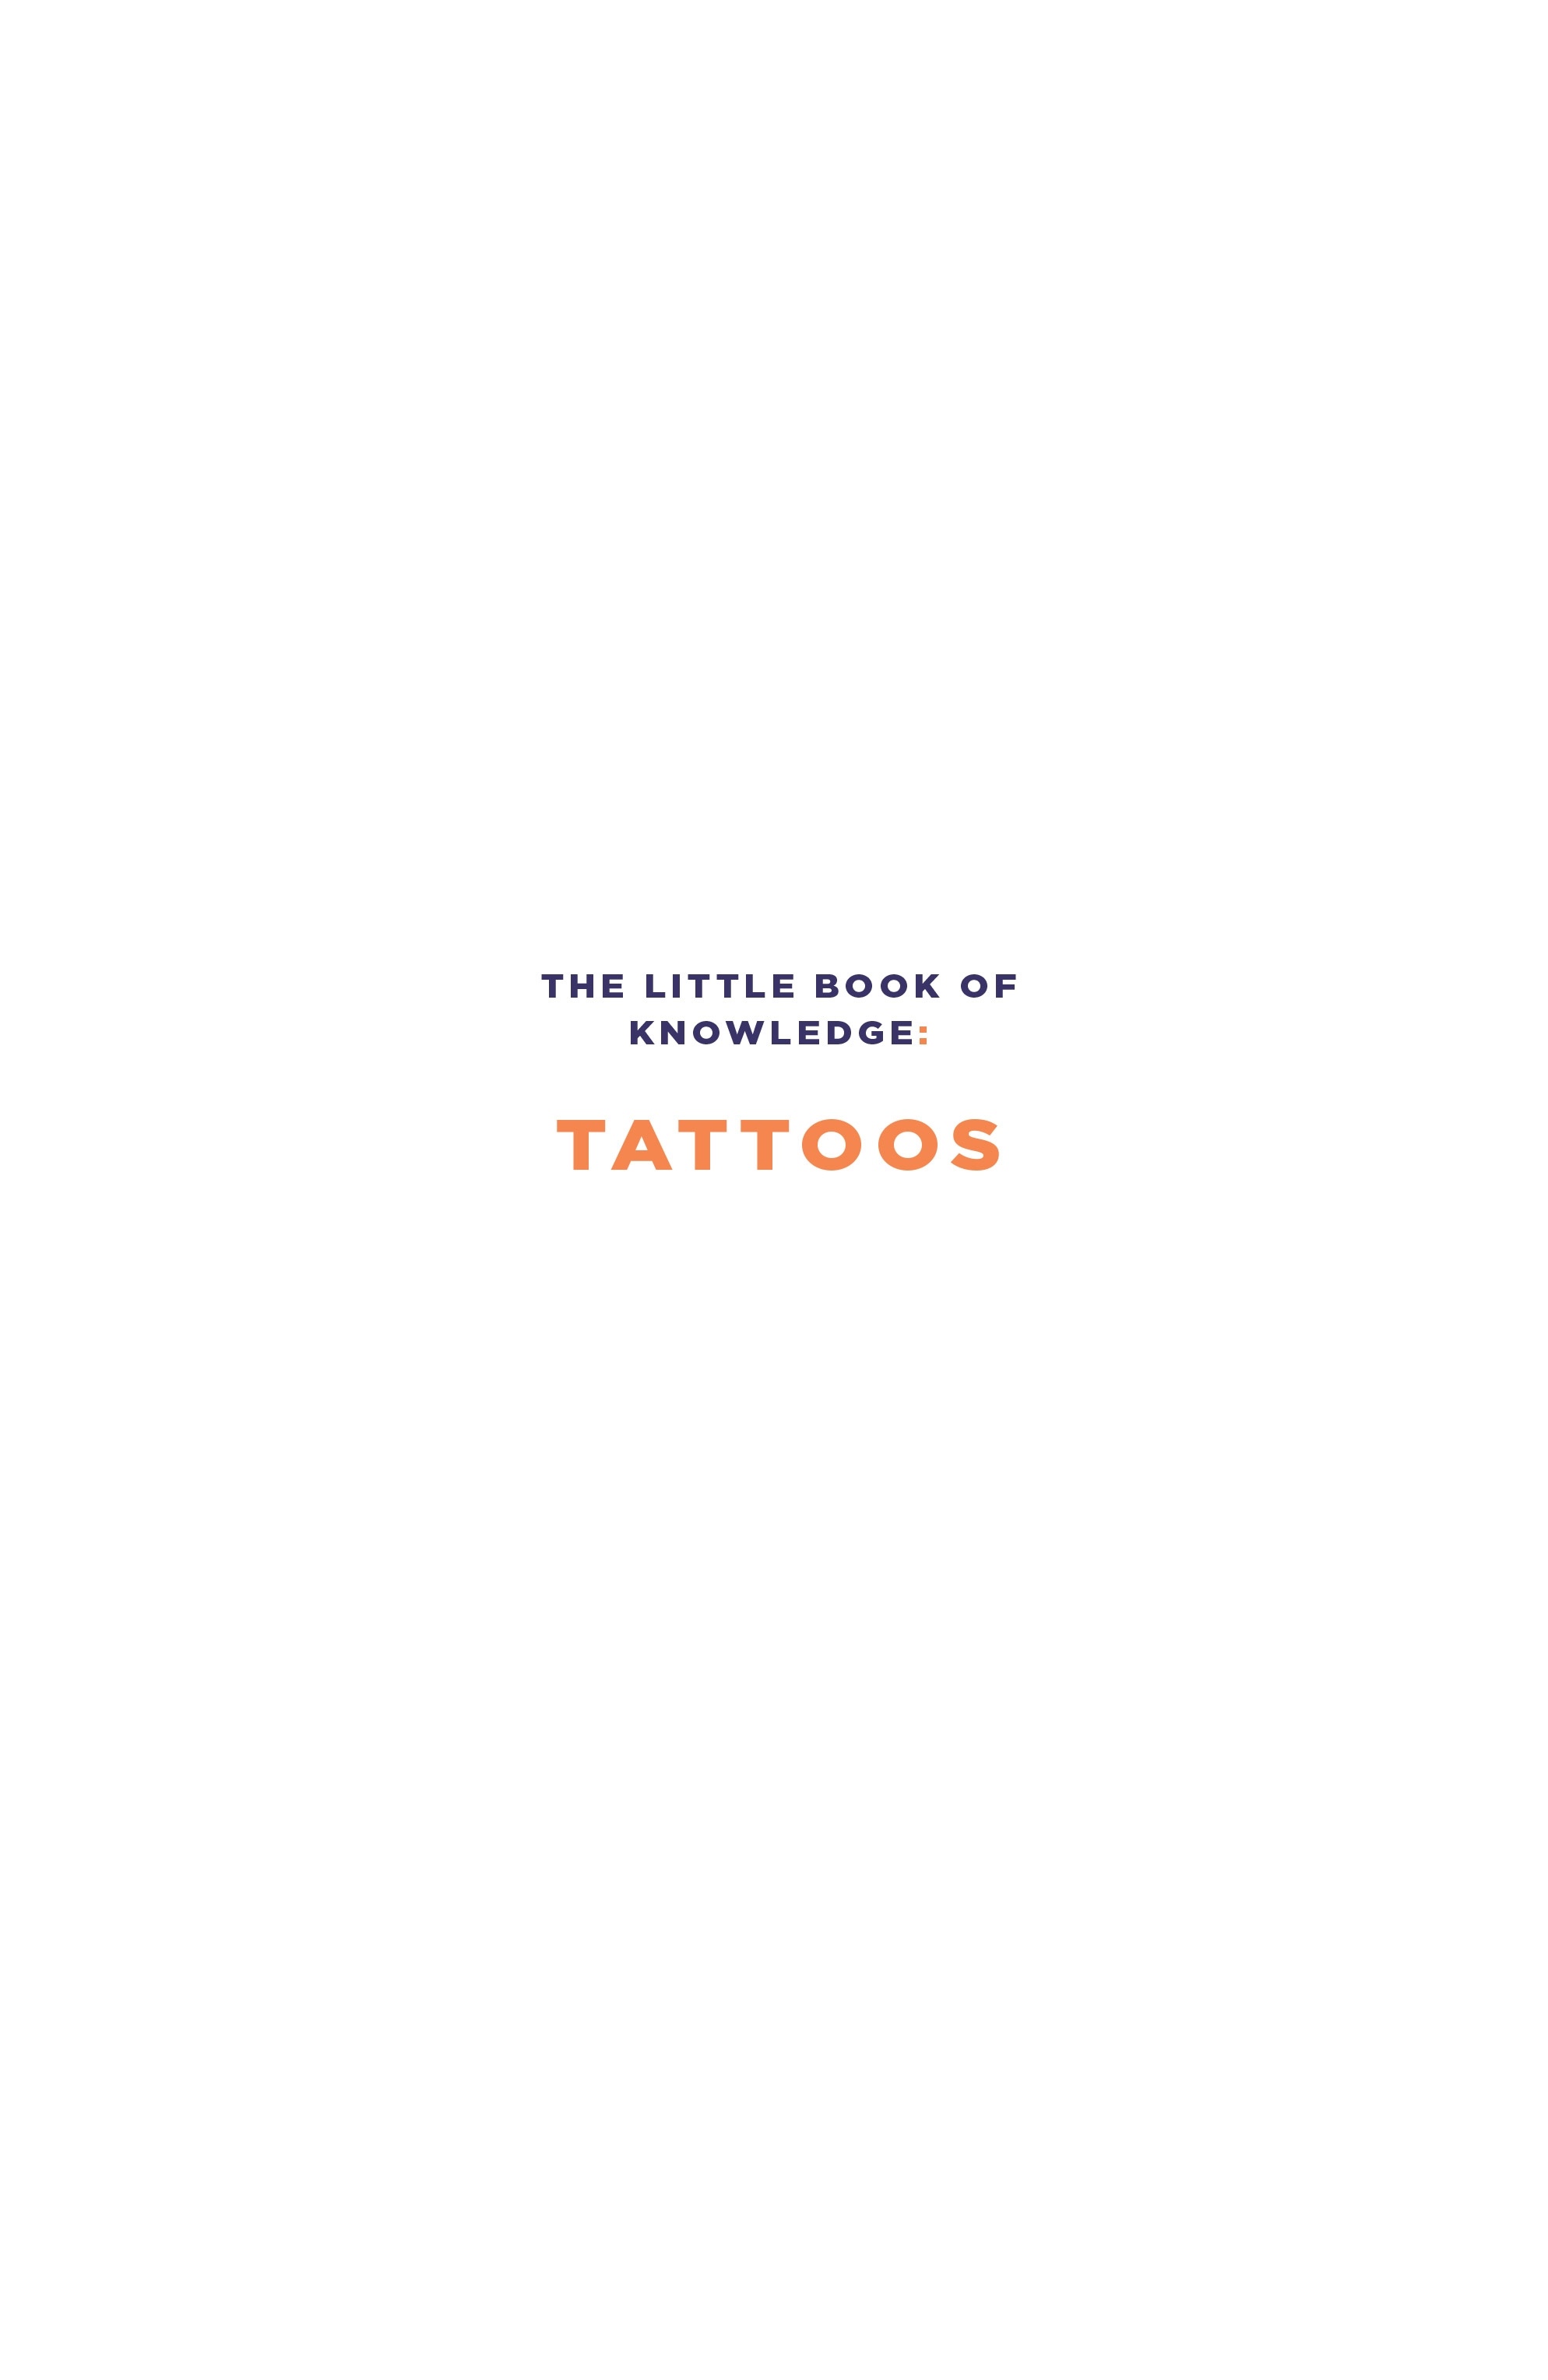 Read online The Little Book of Knowledge: Tattoos comic -  Issue # TPB - 3